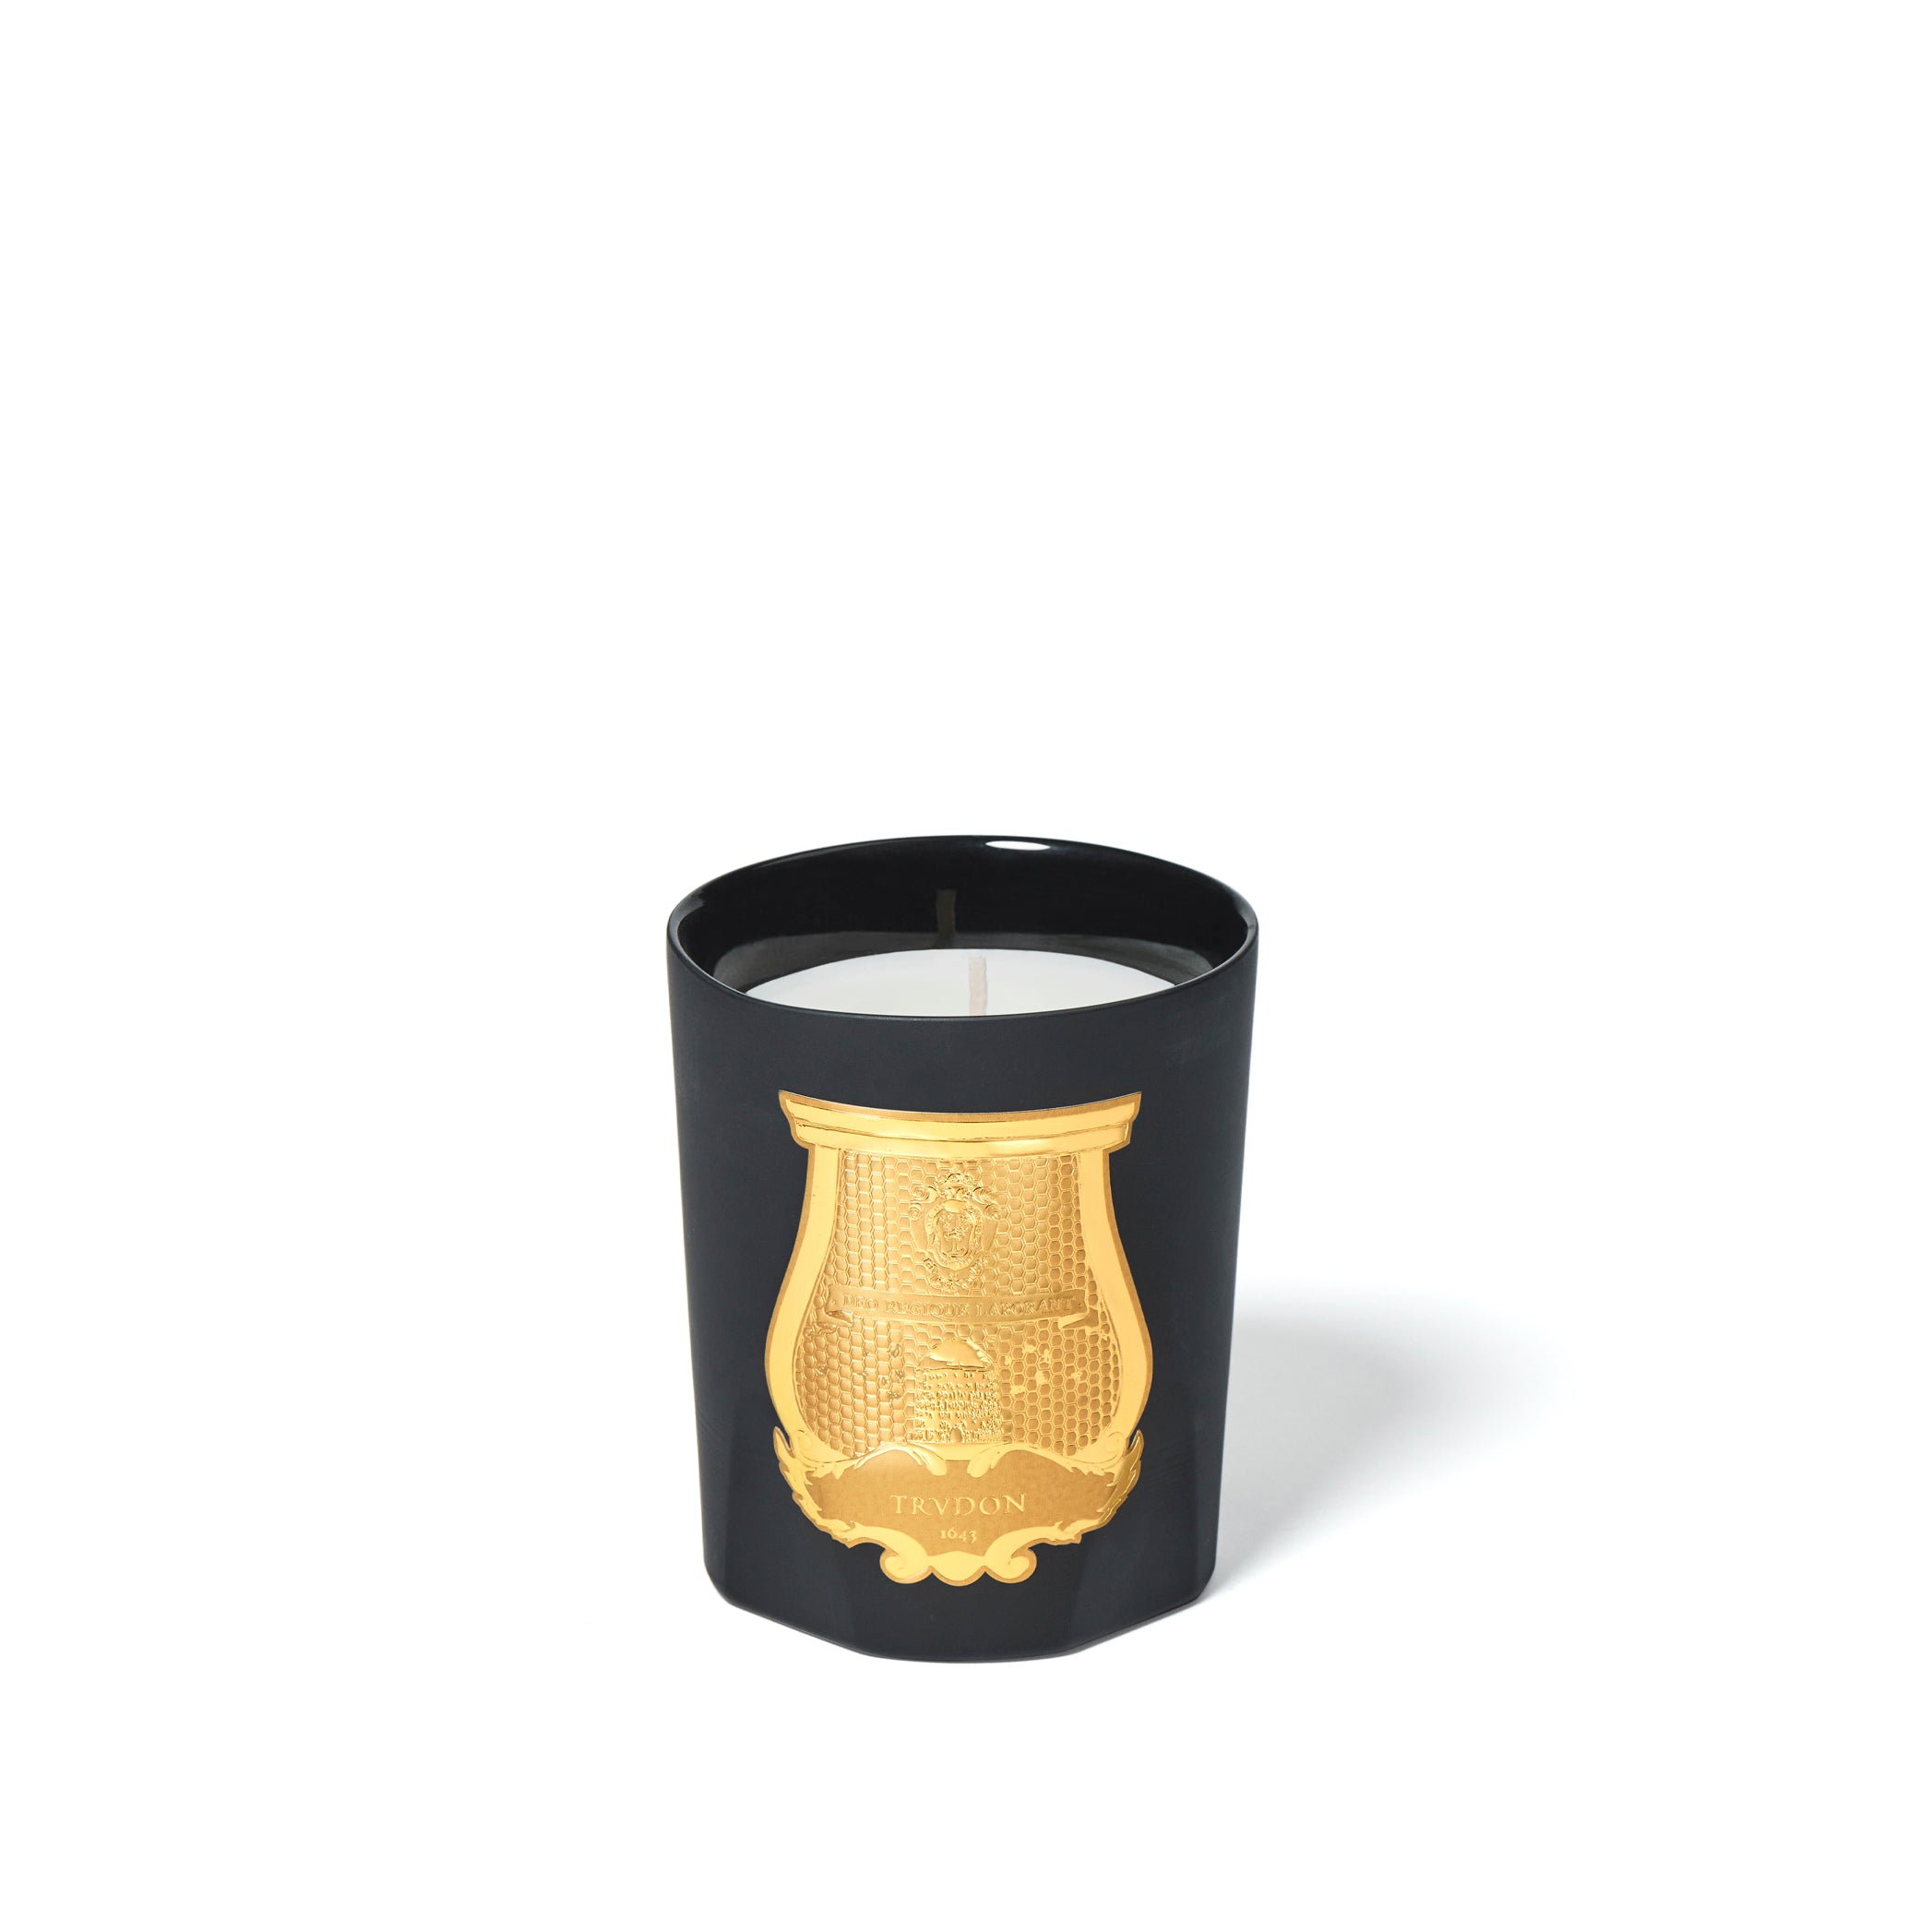 Classic Candle 'Mary' by Trudon, 270g